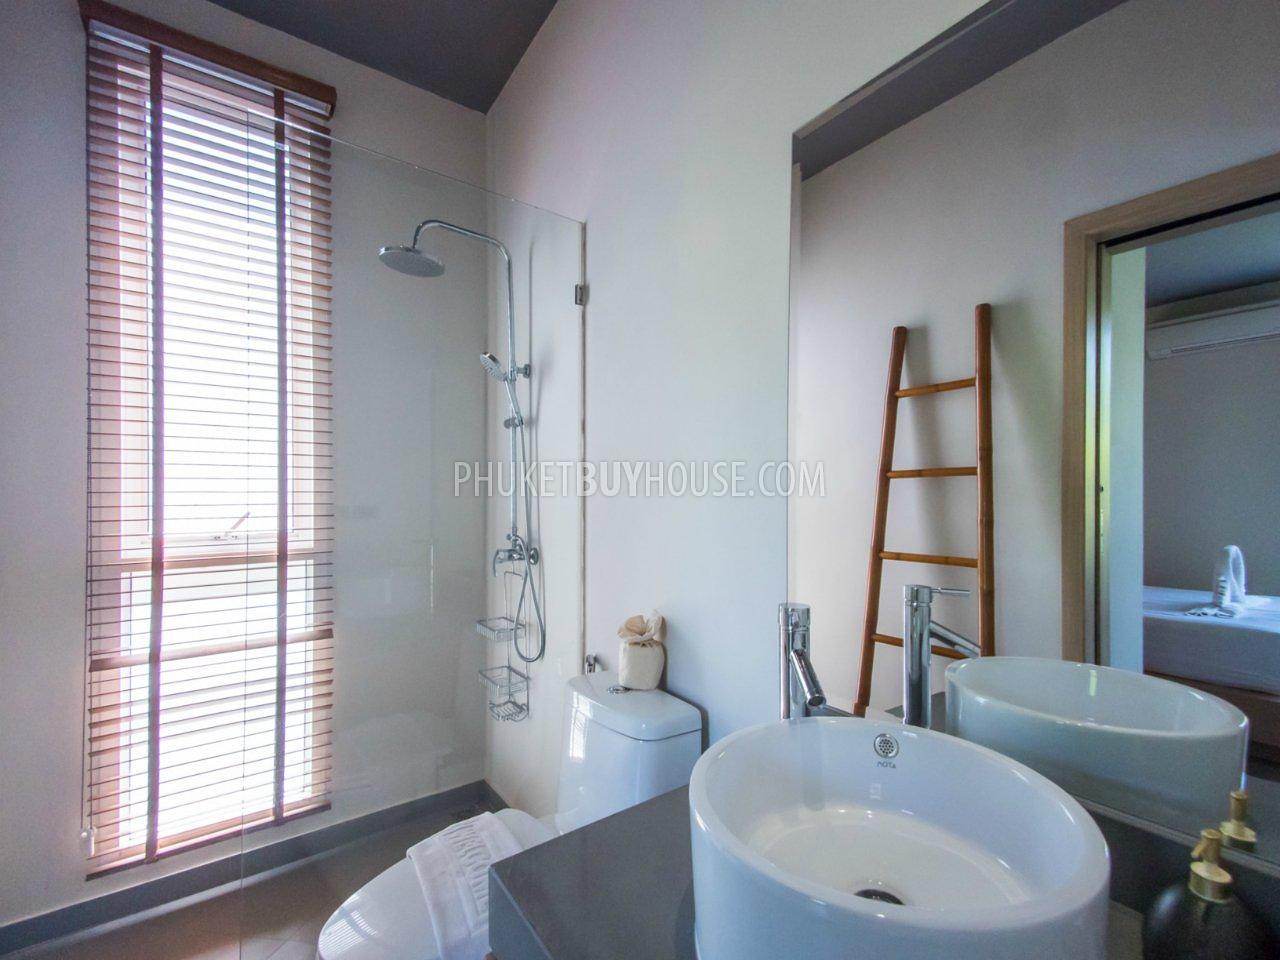 LAY4524: Tropical Modern Villa with 3 bedrooms in Layan. Photo #54